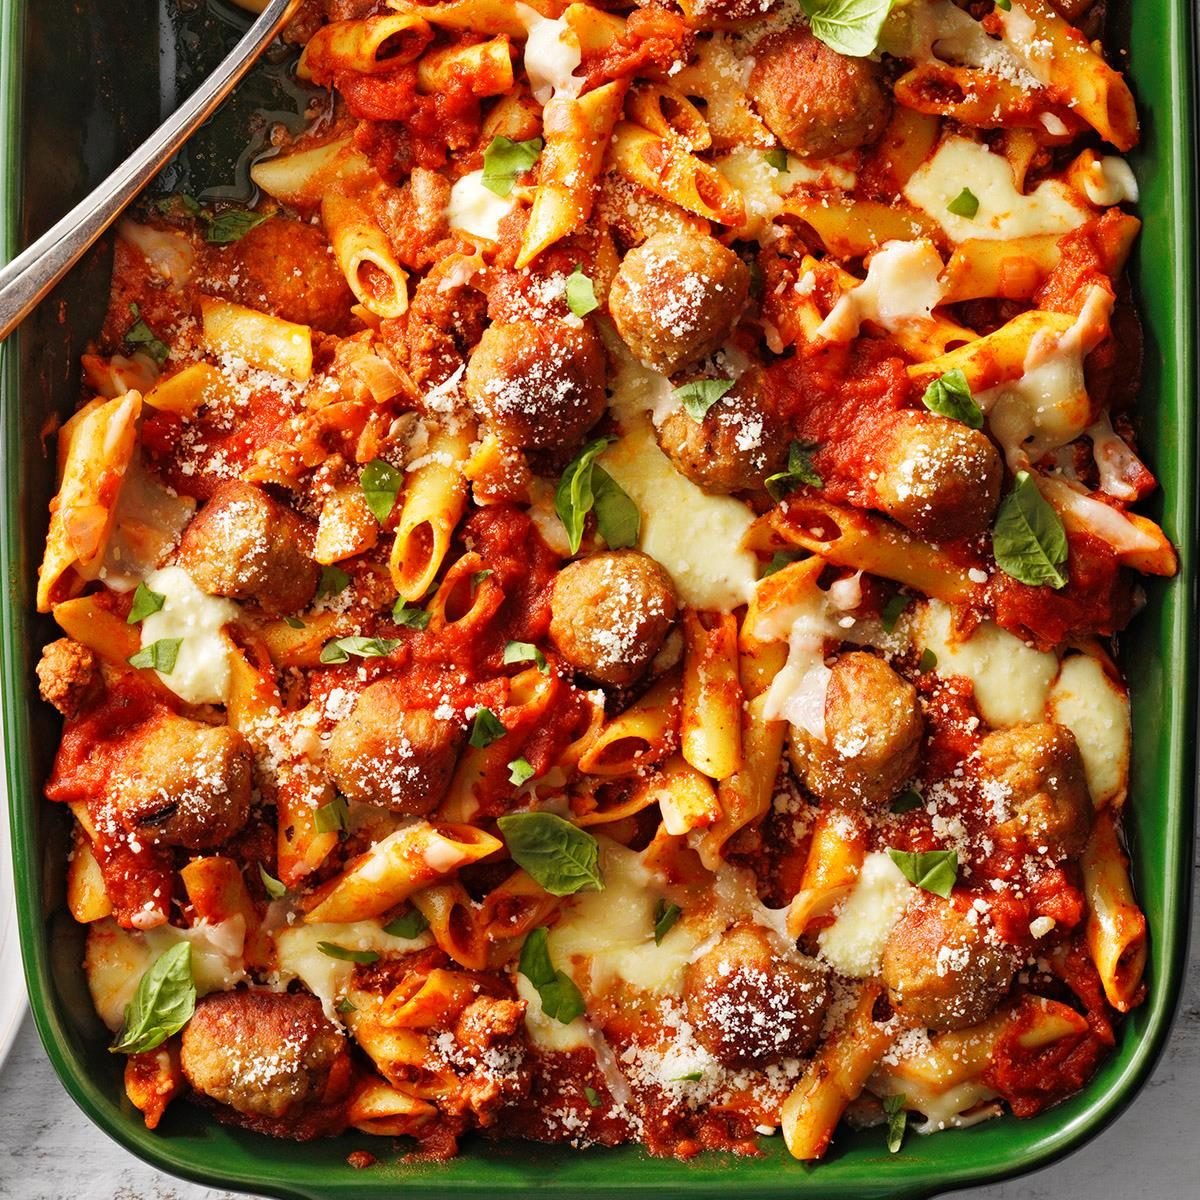 <p>When my husband travels for work, I make a special dinner for my kids to keep their minds off missing Daddy. This tasty mostaccioli is meatball magic. —Jennifer Gilbert, Brighton, Michigan</p> <div class="listicle-page__buttons"> <div class="listicle-page__cta-button"><a href='https://www.tasteofhome.com/recipes/three-cheese-meatball-mostaccioli/'>Go to Recipe</a></div> </div>